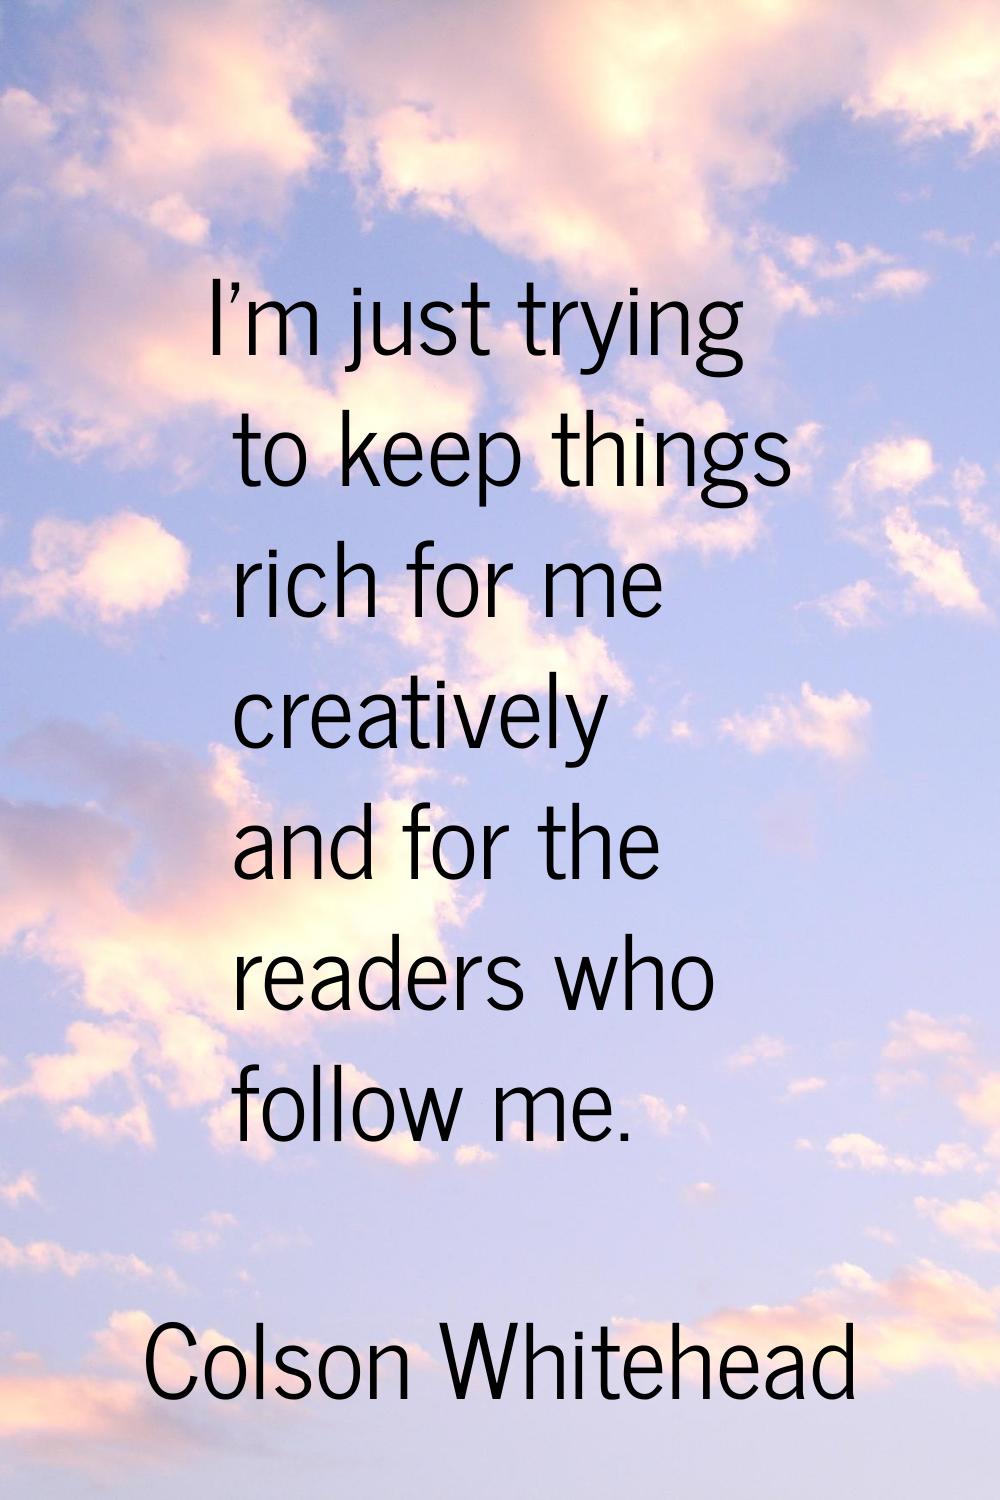 I'm just trying to keep things rich for me creatively and for the readers who follow me.